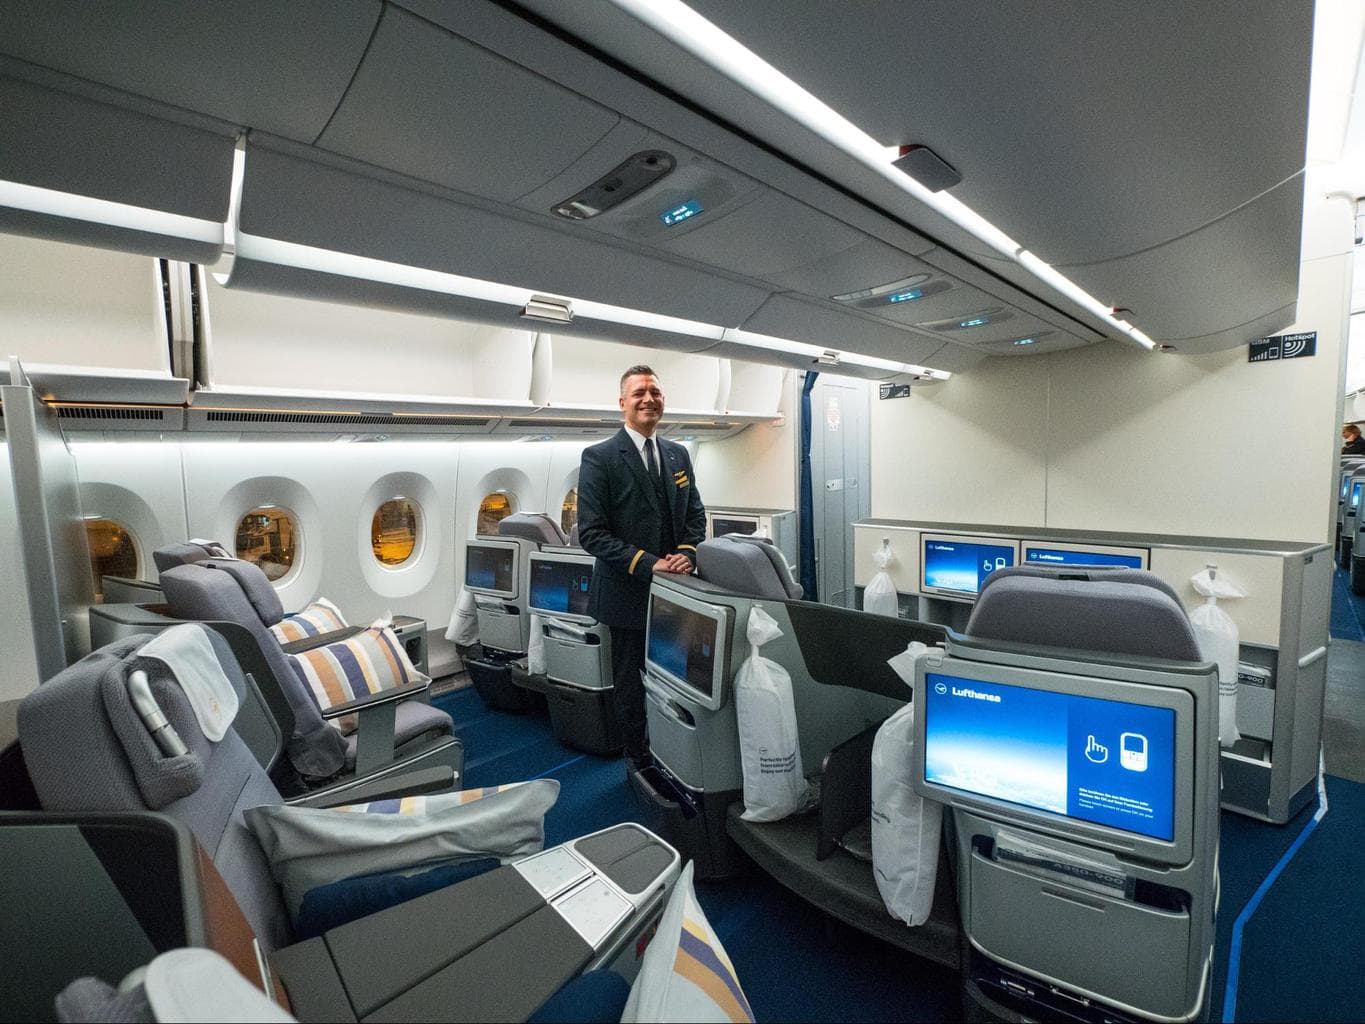 The Business Class cabin on the new Lufthansa A350